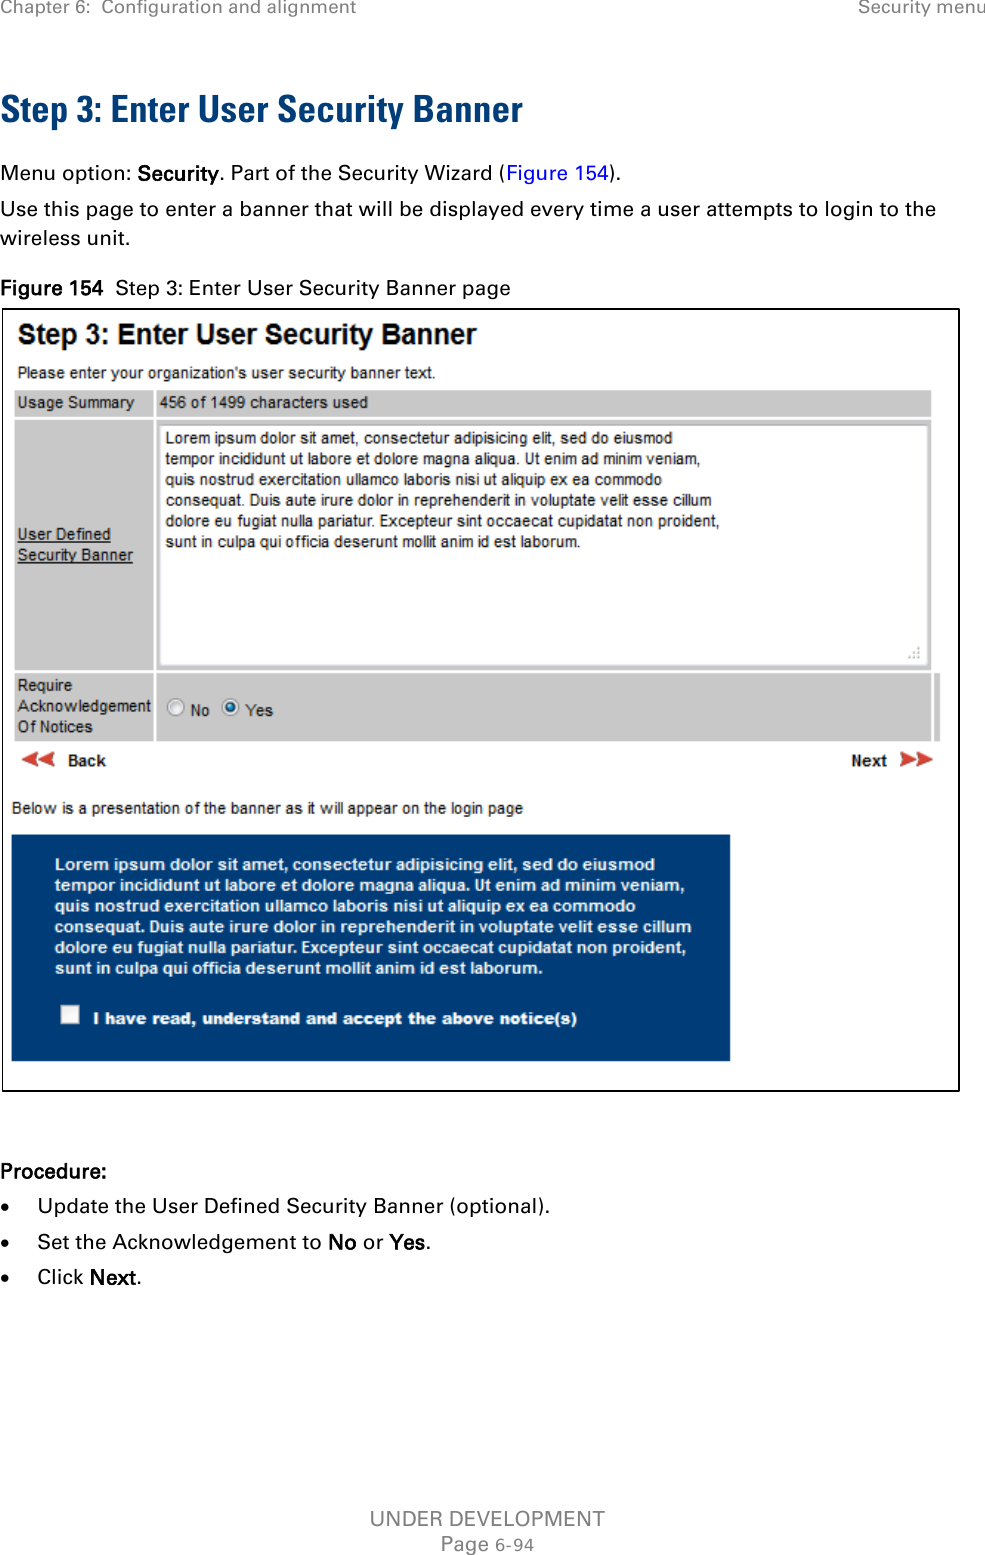 Chapter 6:  Configuration and alignment Security menu  Step 3: Enter User Security Banner Menu option: Security. Part of the Security Wizard (Figure 154). Use this page to enter a banner that will be displayed every time a user attempts to login to the wireless unit.  Figure 154  Step 3: Enter User Security Banner page   Procedure: • Update the User Defined Security Banner (optional). • Set the Acknowledgement to No or Yes. • Click Next. UNDER DEVELOPMENT Page 6-94 